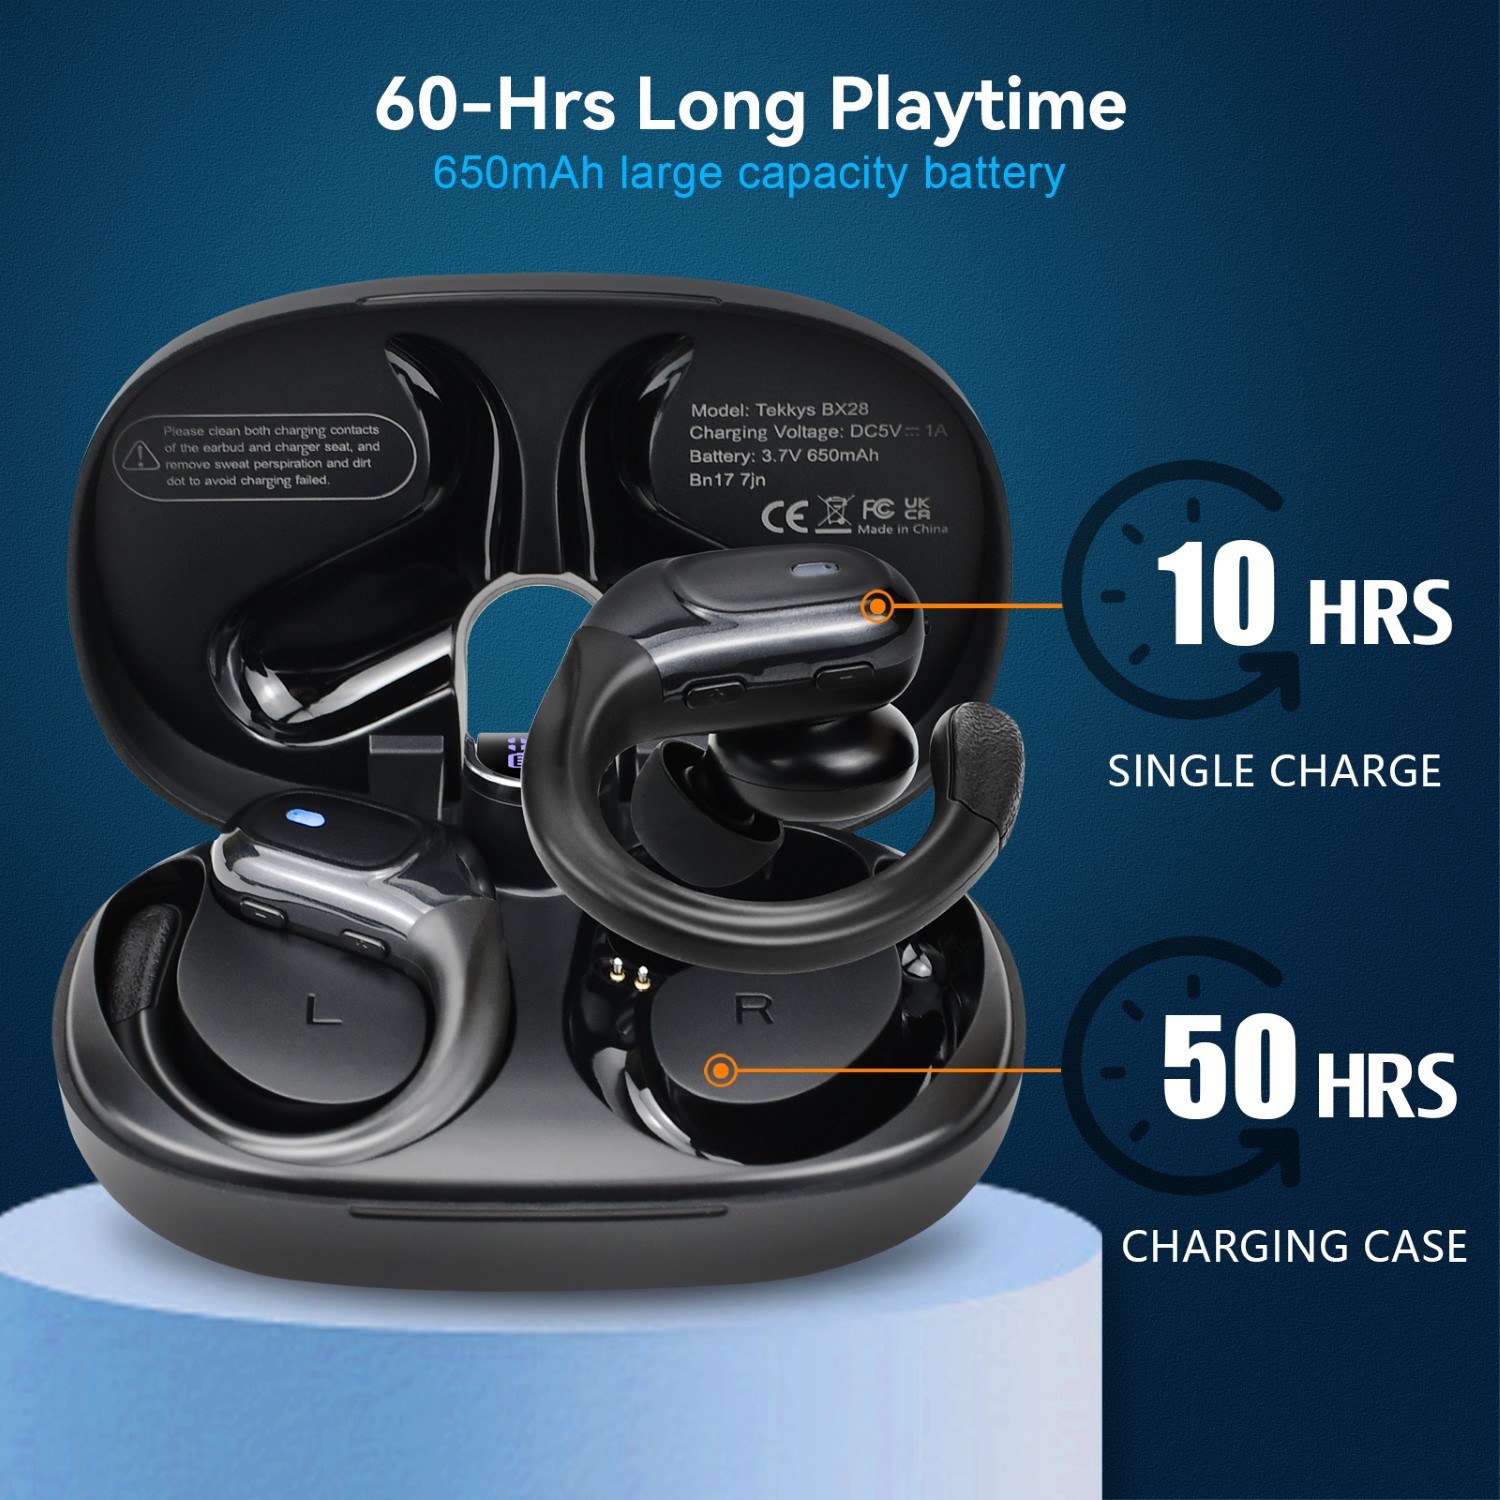 earbuds, wireless earbuds, long hour battery, music play, smart control, led display, handsfree